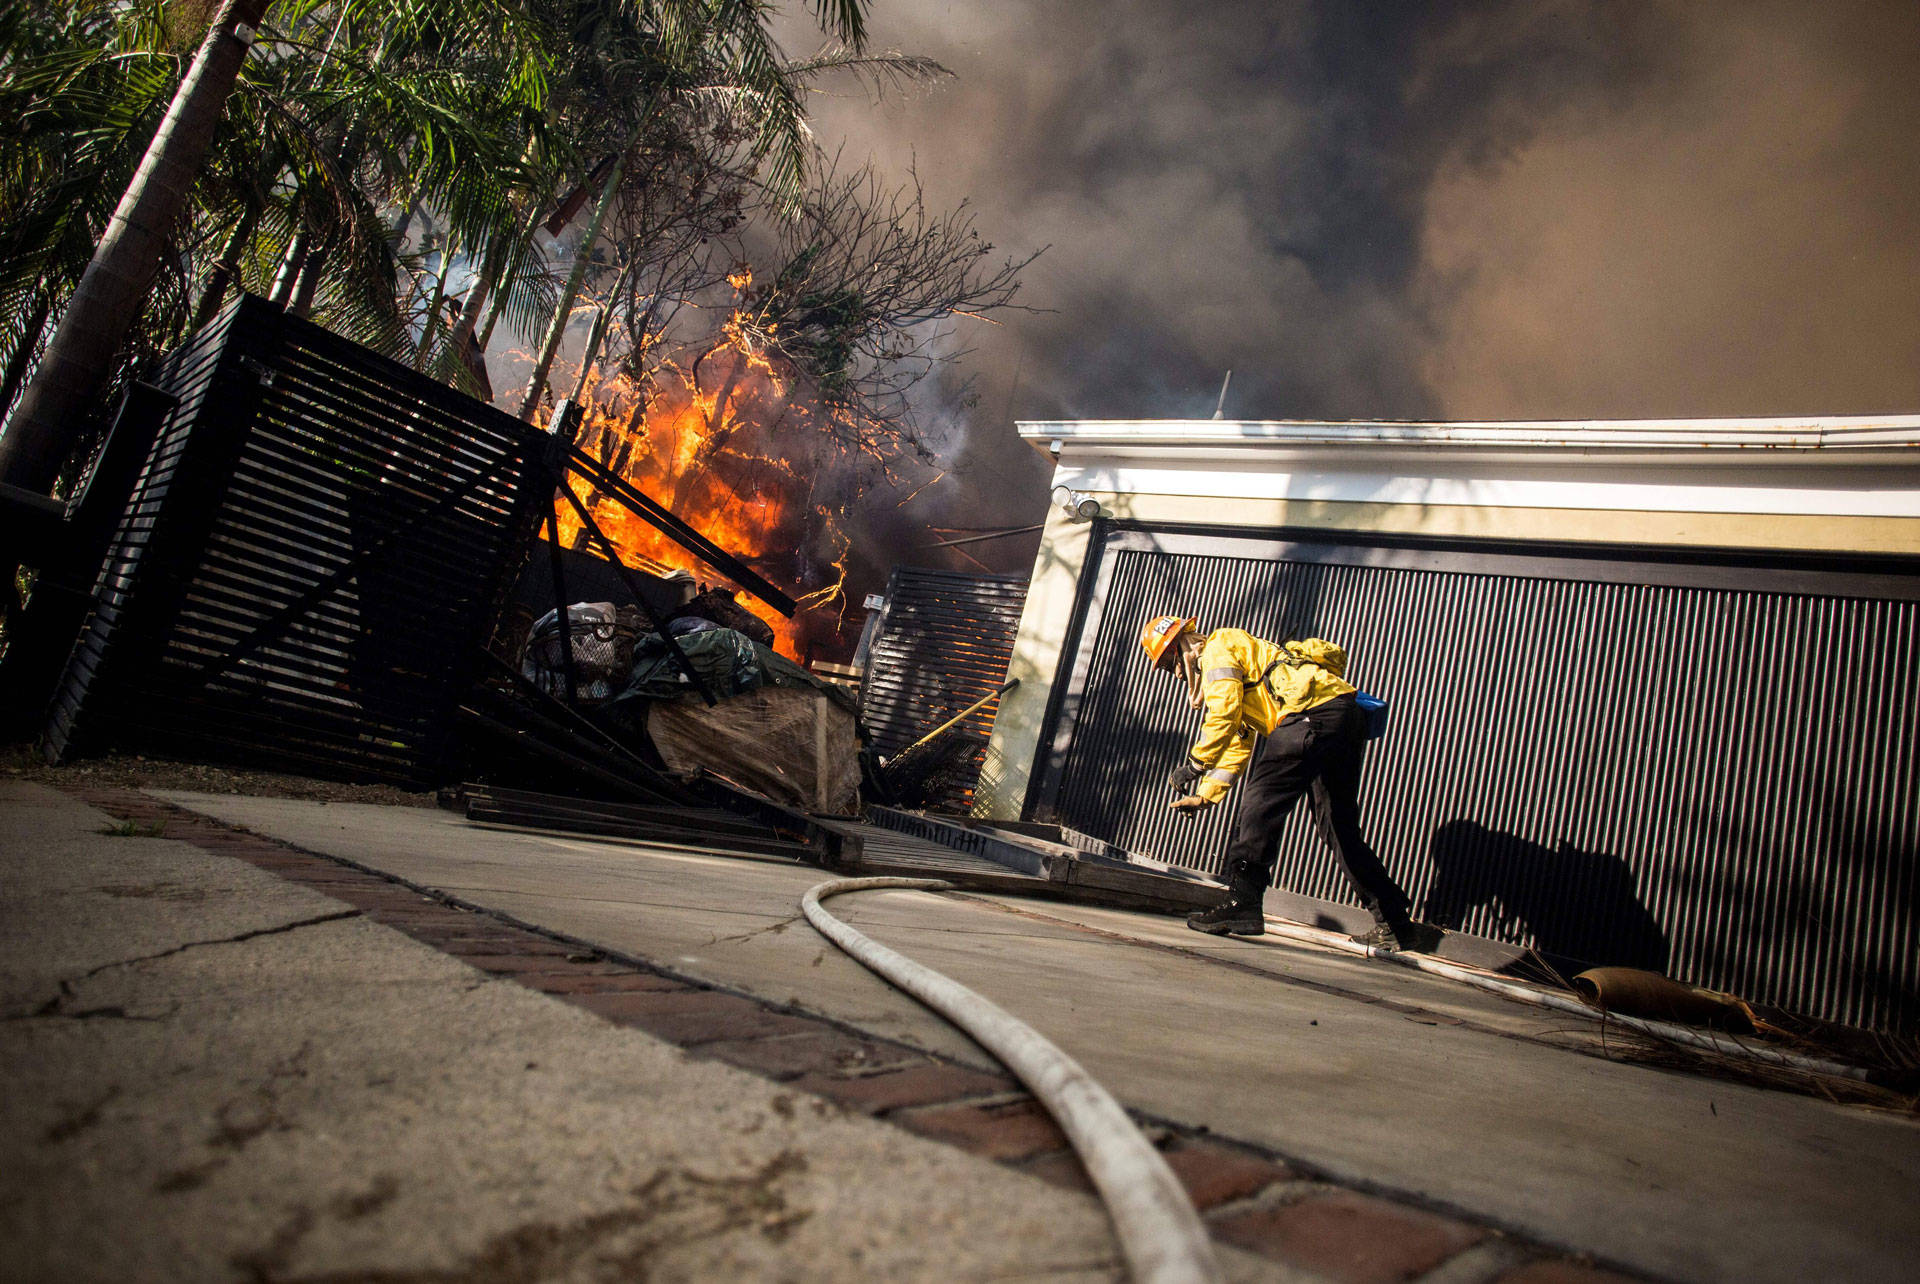 Firefighters work to save burning houses along Linda Flora Drive during the Skirball Fire in Los Angeles on Dec. 6, 2017.  KYLE GRILLOT/AFP/Getty Images